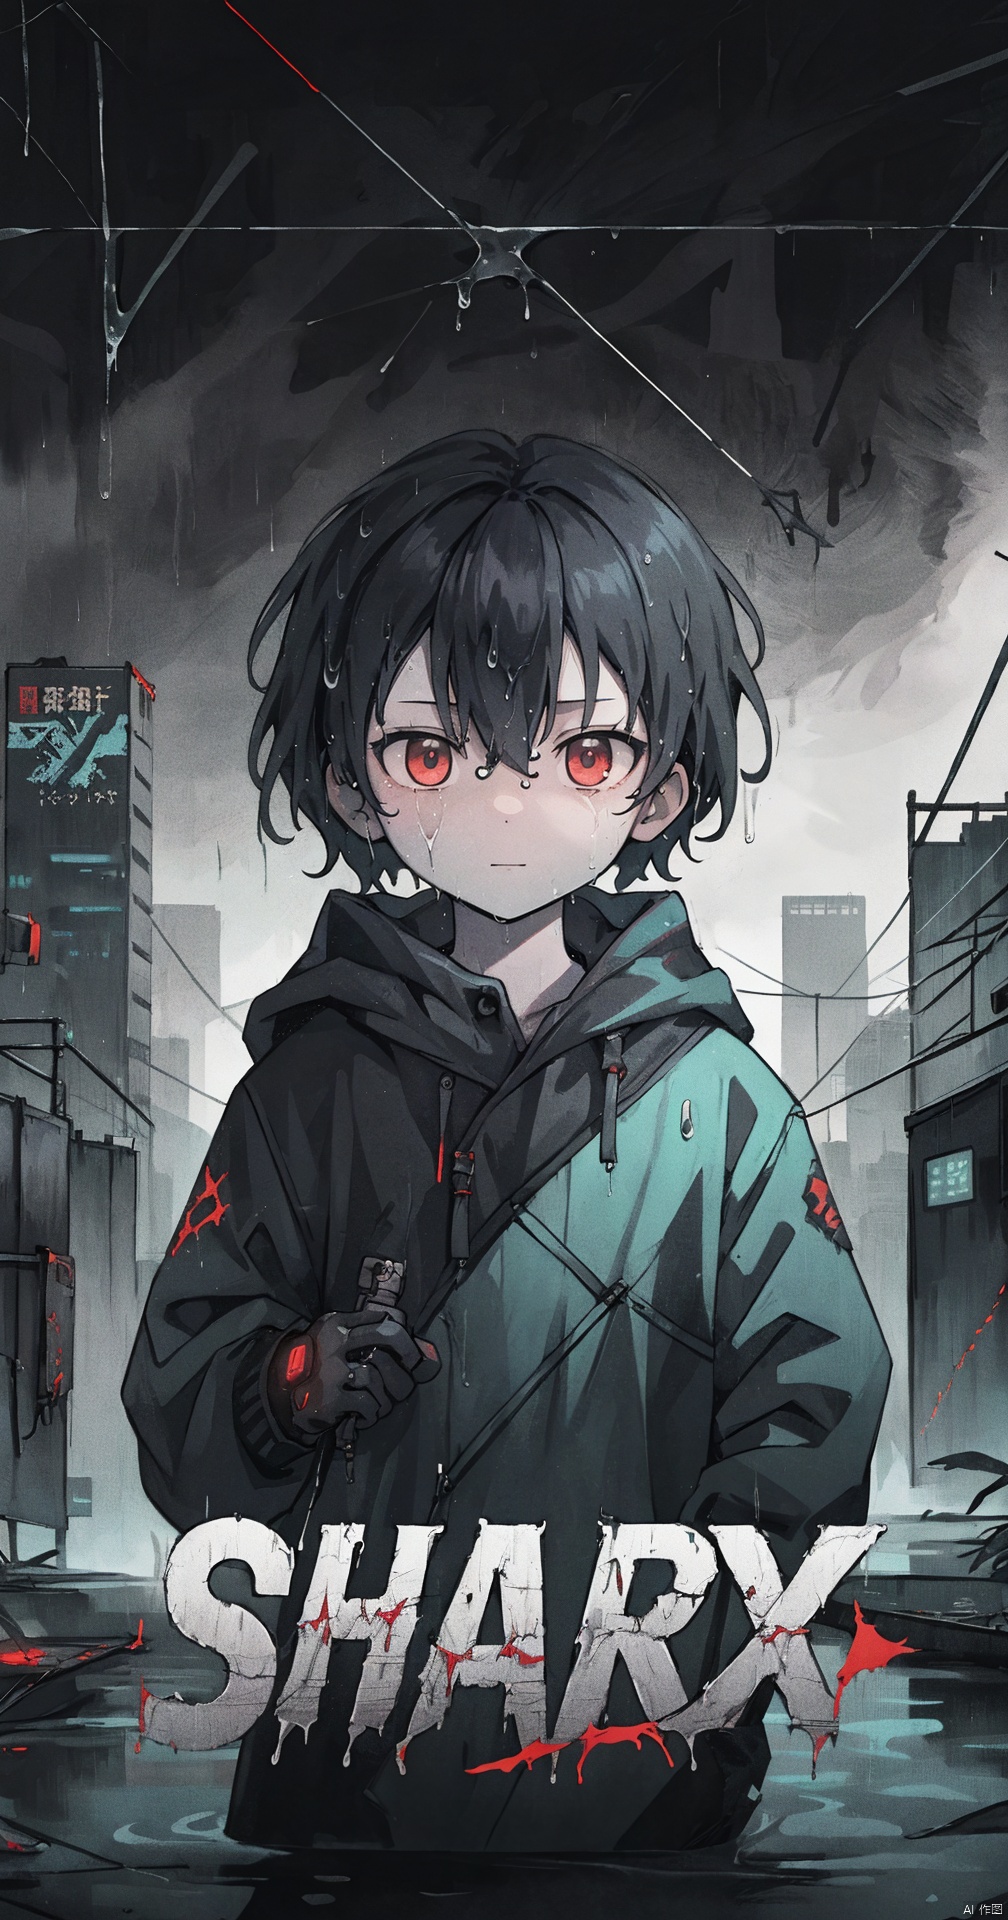  e style thriller poster,character name, English fonnt,1gril,solo,
,hafu,china,cyberpunk theme,e style thriller posterl,(masterpiece:1.1), (best quality:1.2), highres, original, extremely detailed wallpaper, official art, shota,rain,water